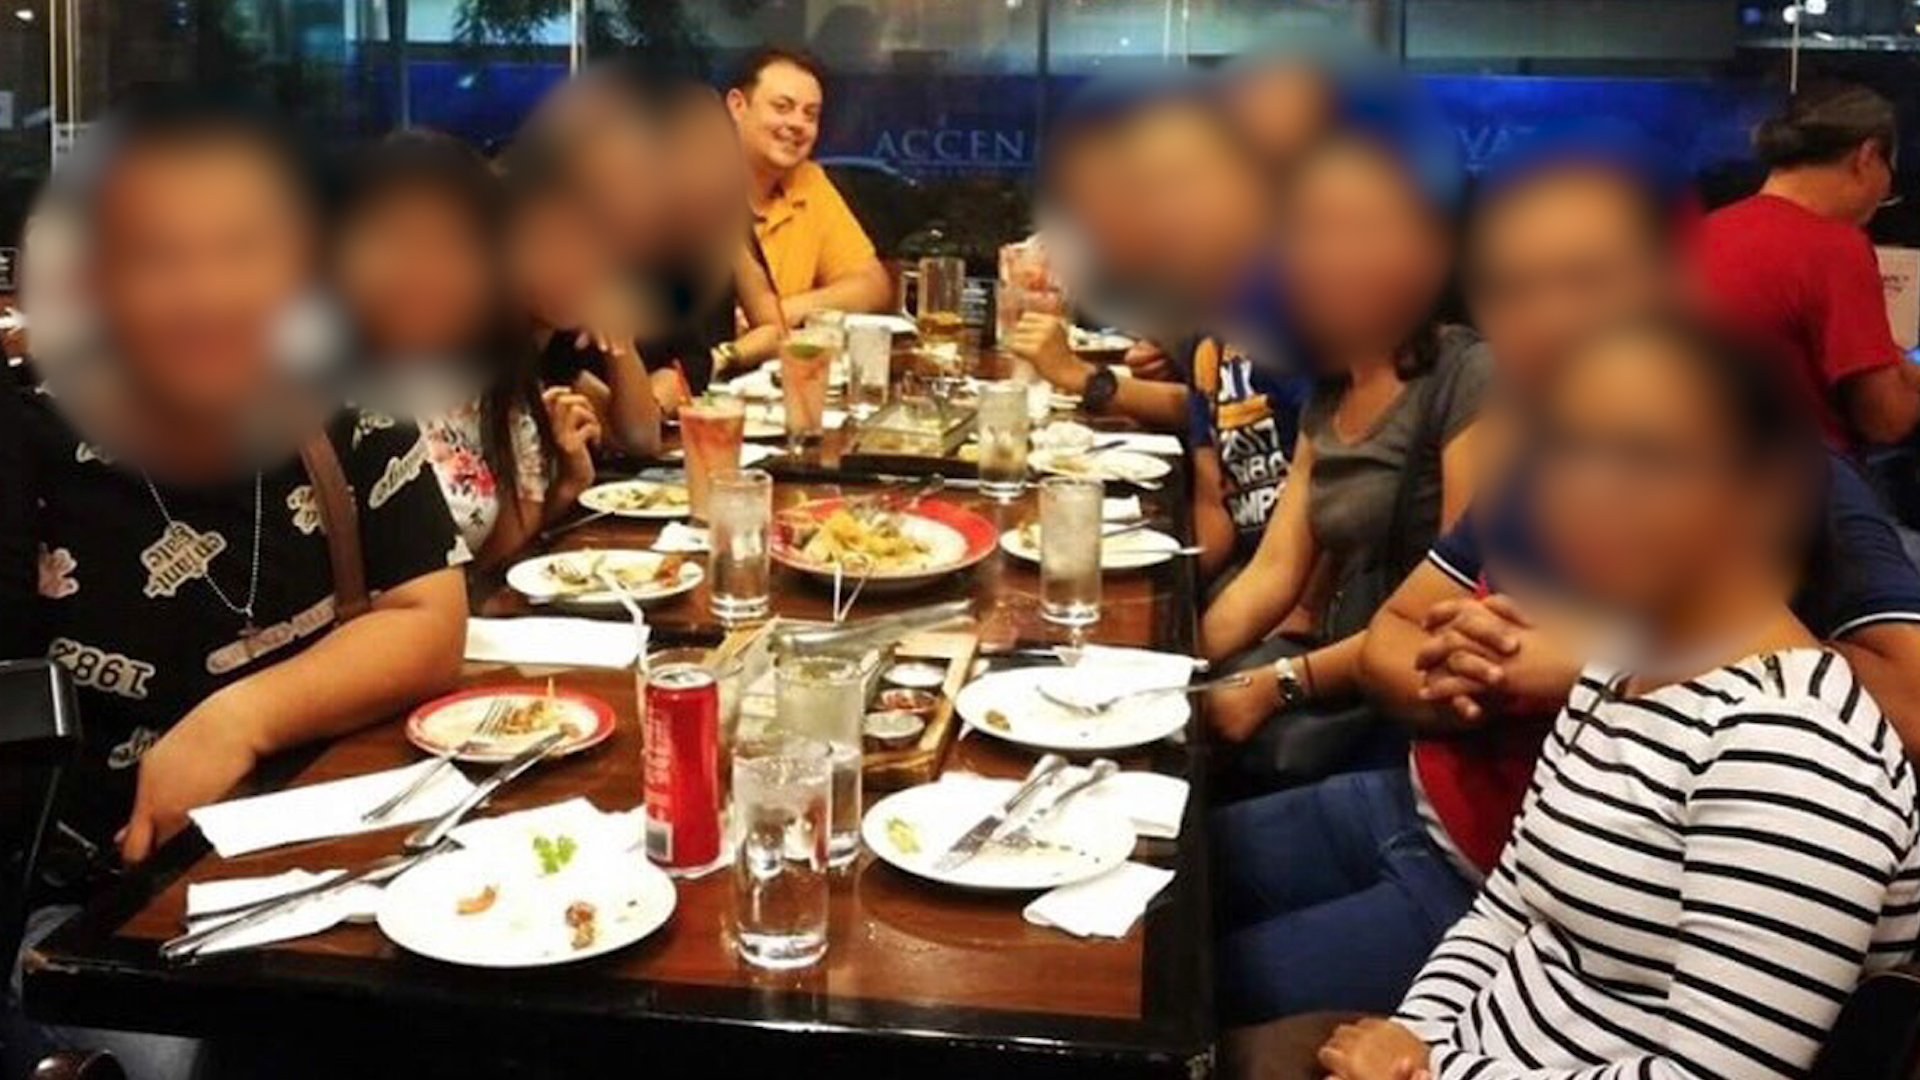 Michael James (back, left) having dinner, believed to be in the Philippines.